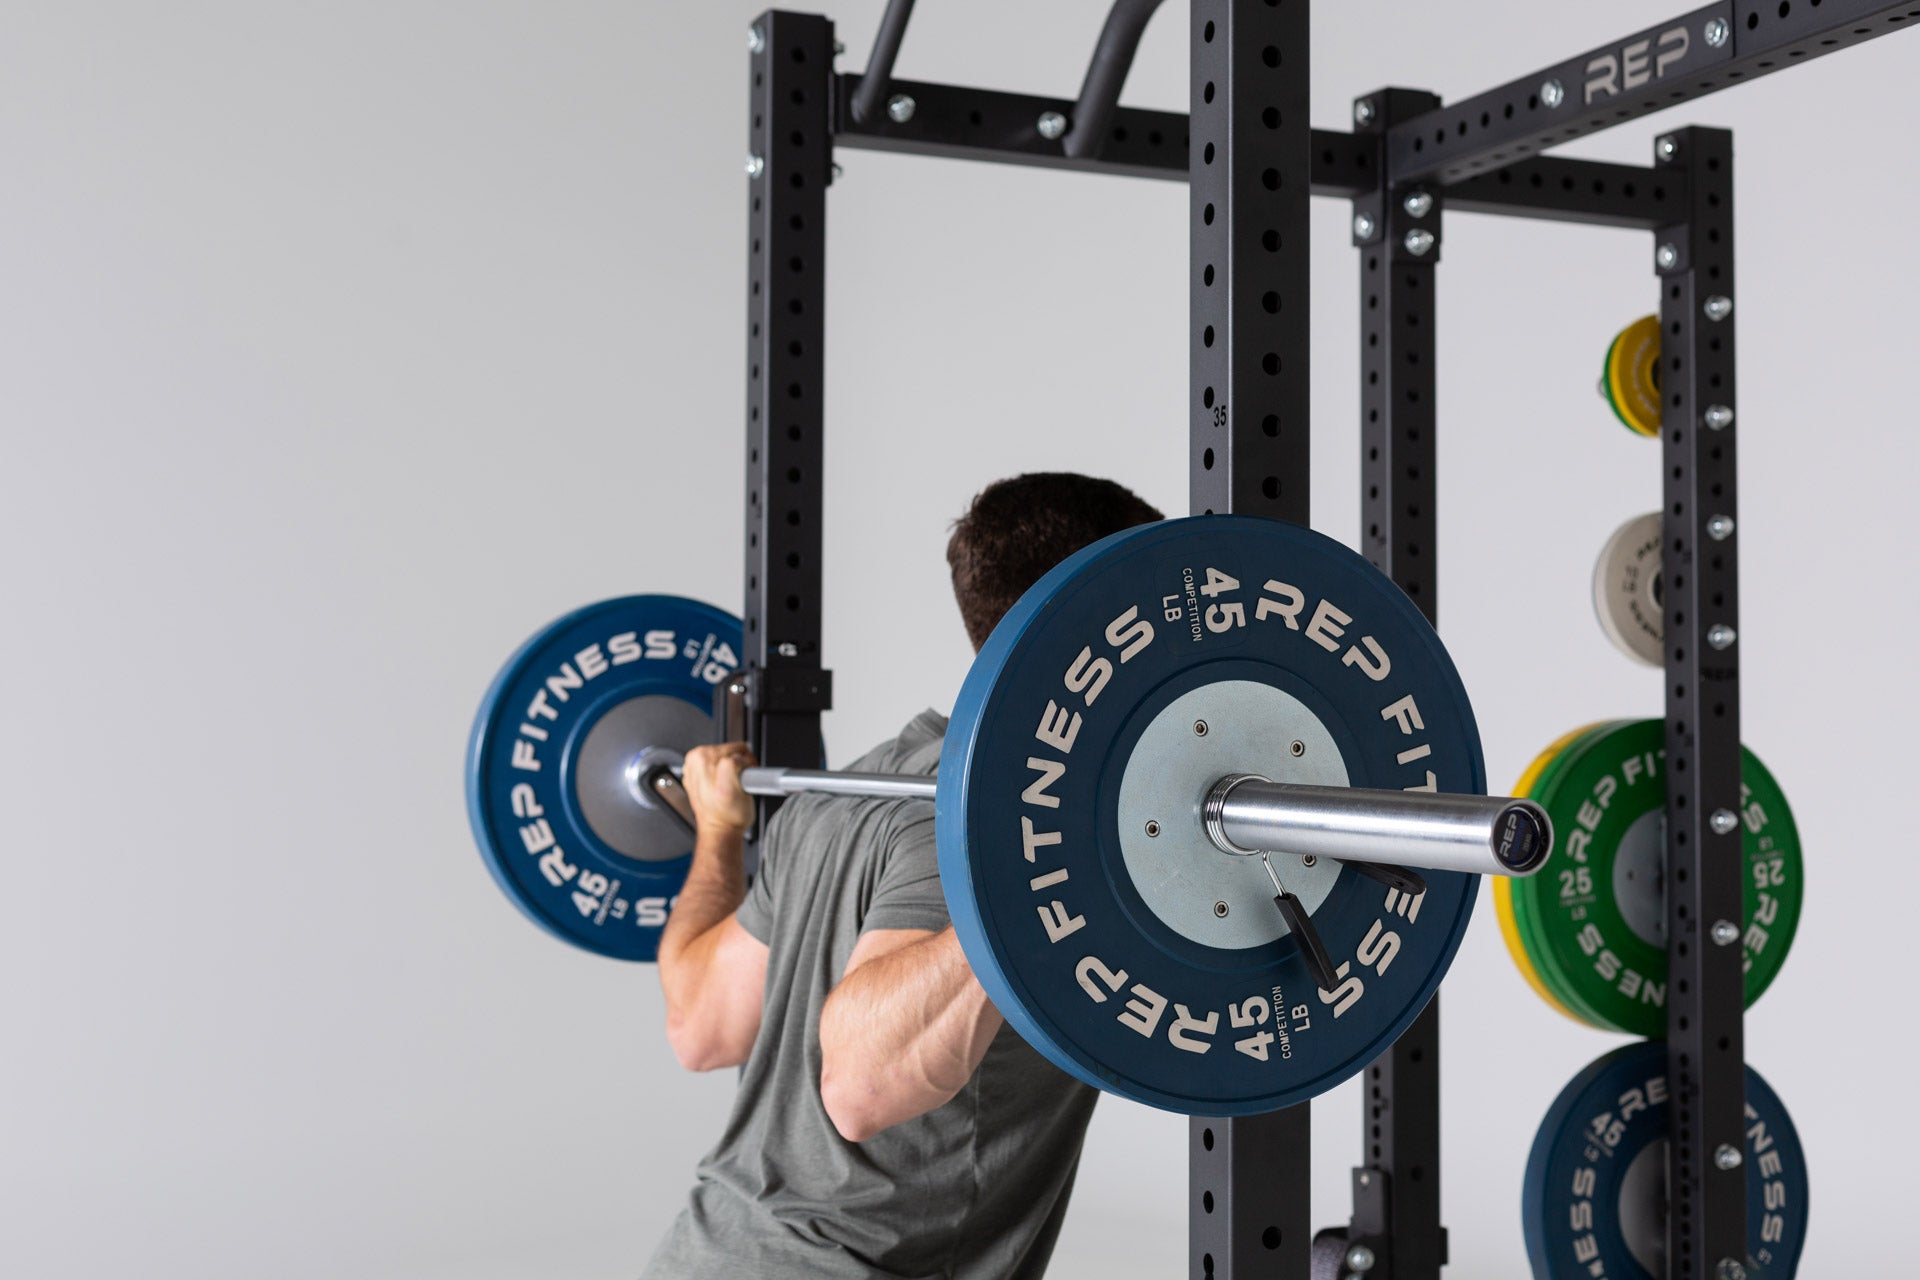 Close up view of a lifter preparing to unrack a barbell loaded with 45lb Competition Bumper Plates from the J-cups on a PR-4000 rack.